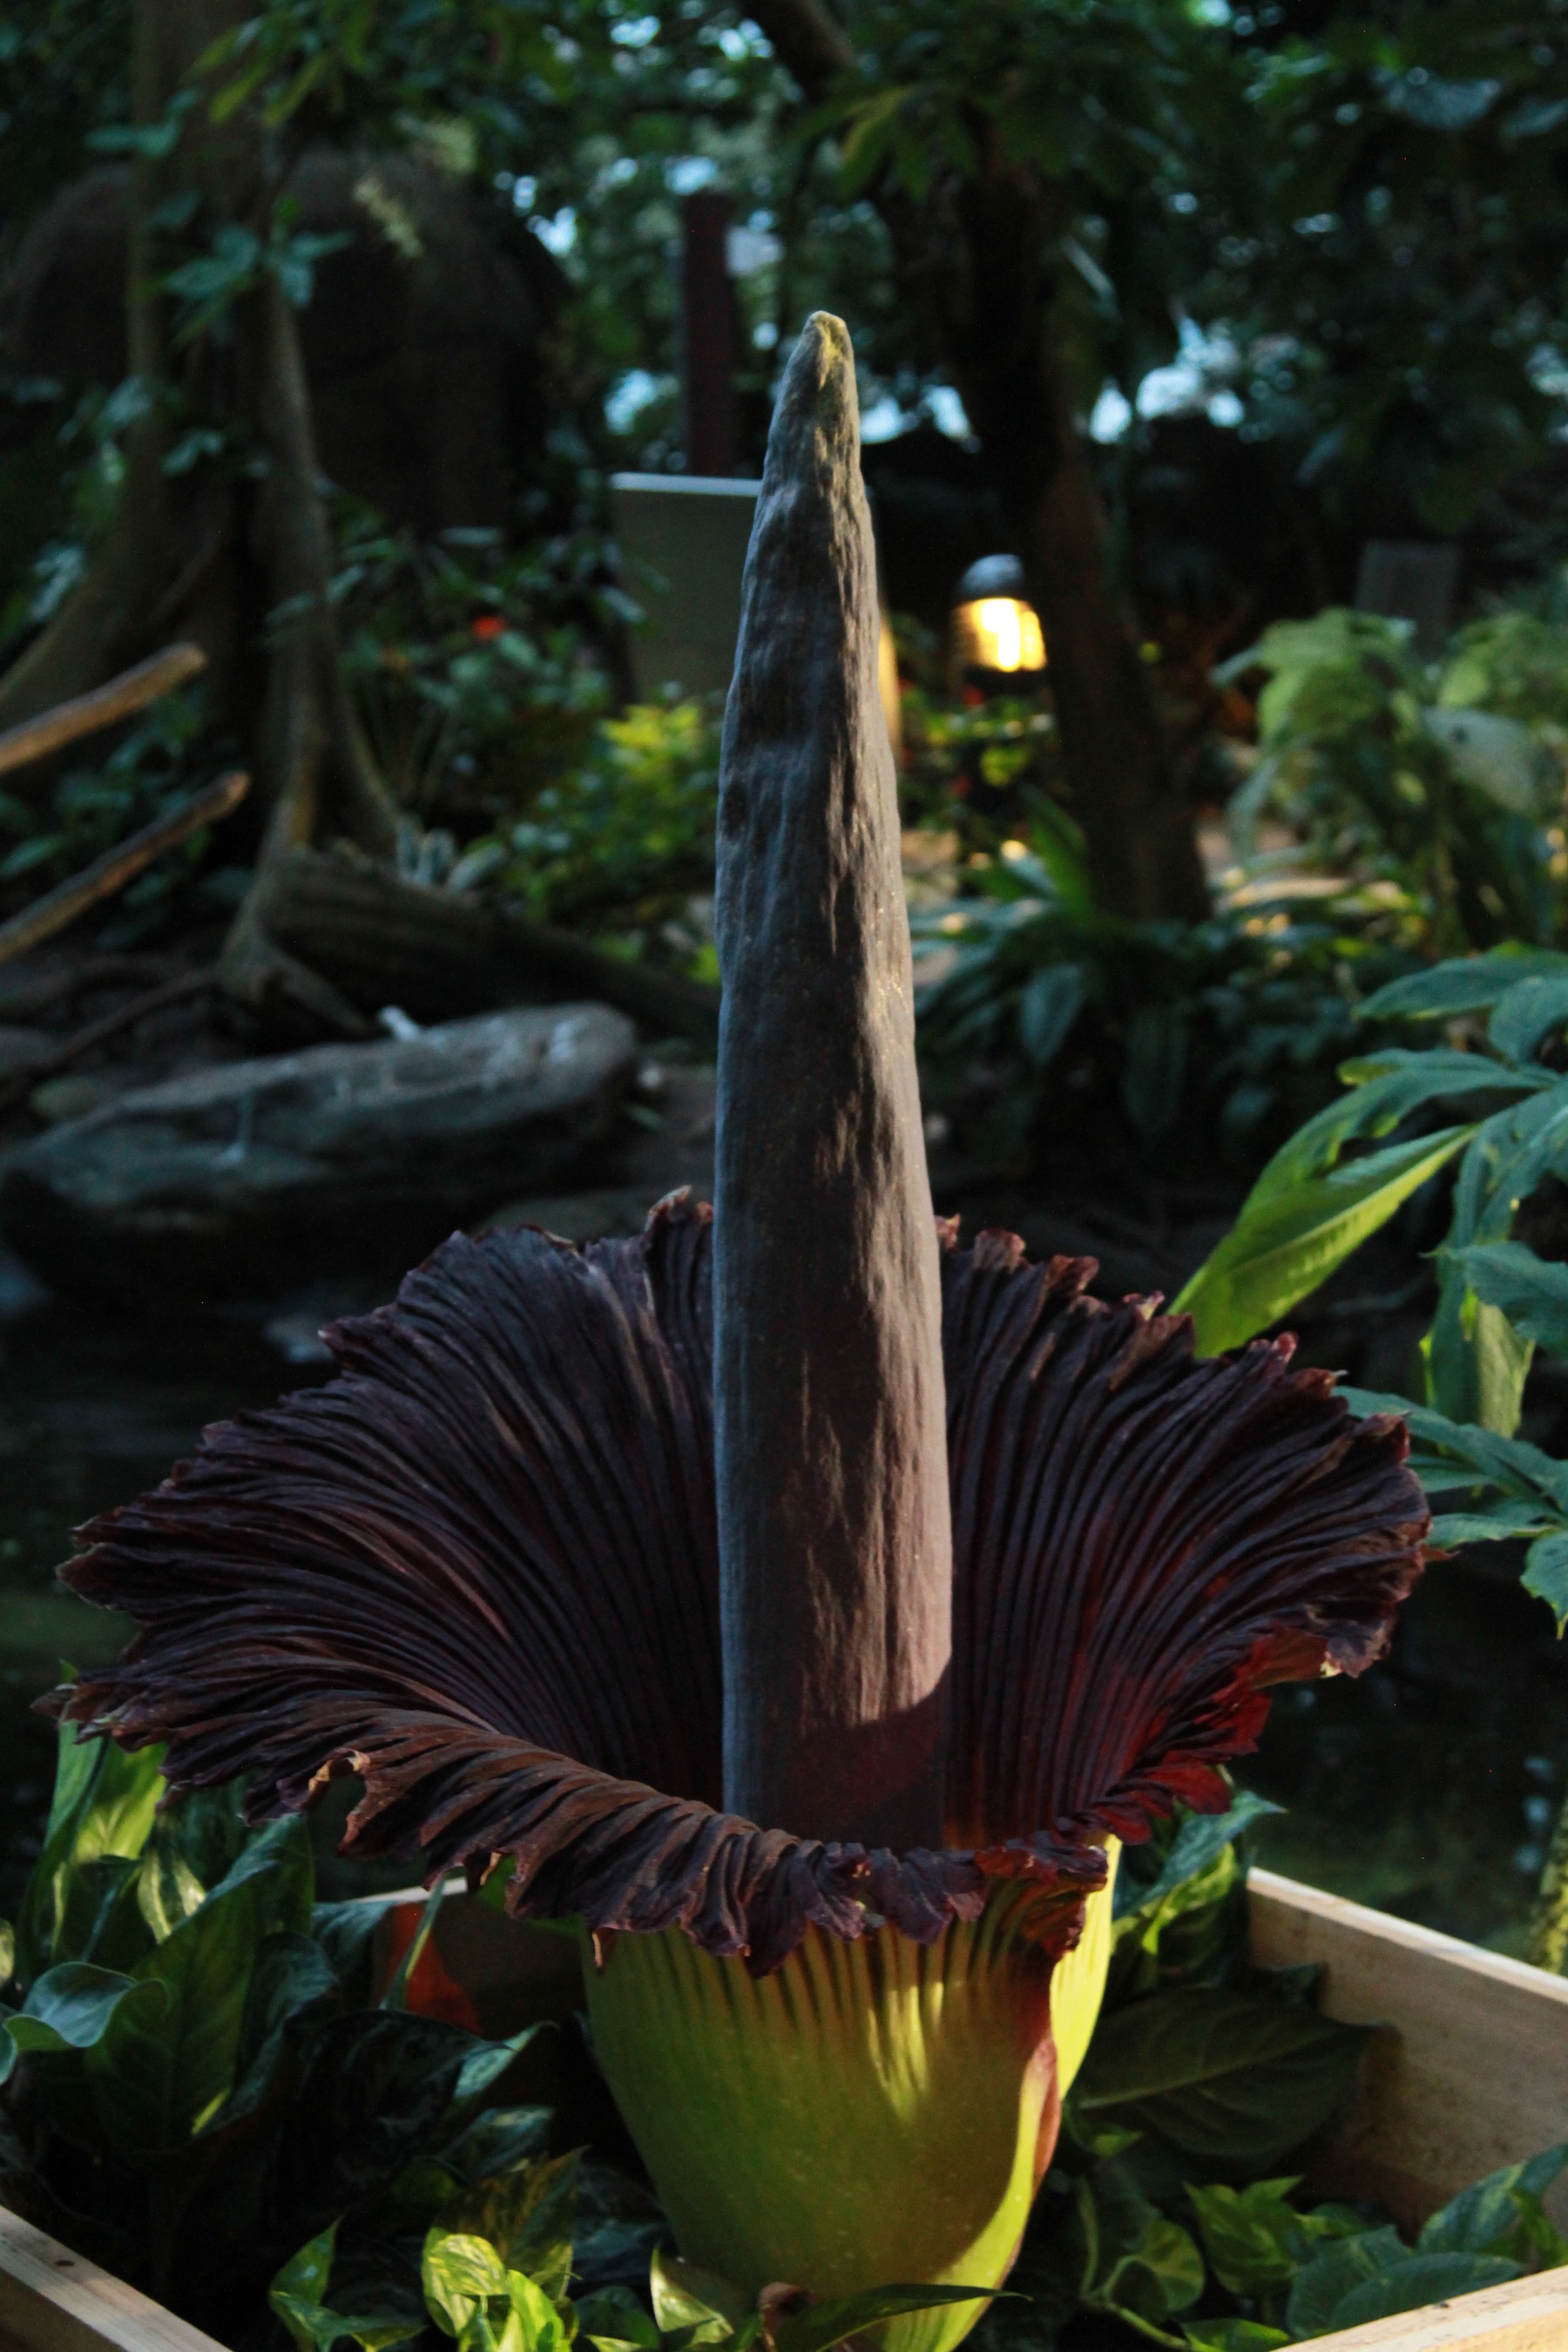 A Corpse Flower named "Morticia" opened Saturday afternoon and delivered a powerful stench that smells like rotting flesh for visitors who came to see her at Moody Gardens in Galveston, TX. Her bloom is expected to last two to four days.